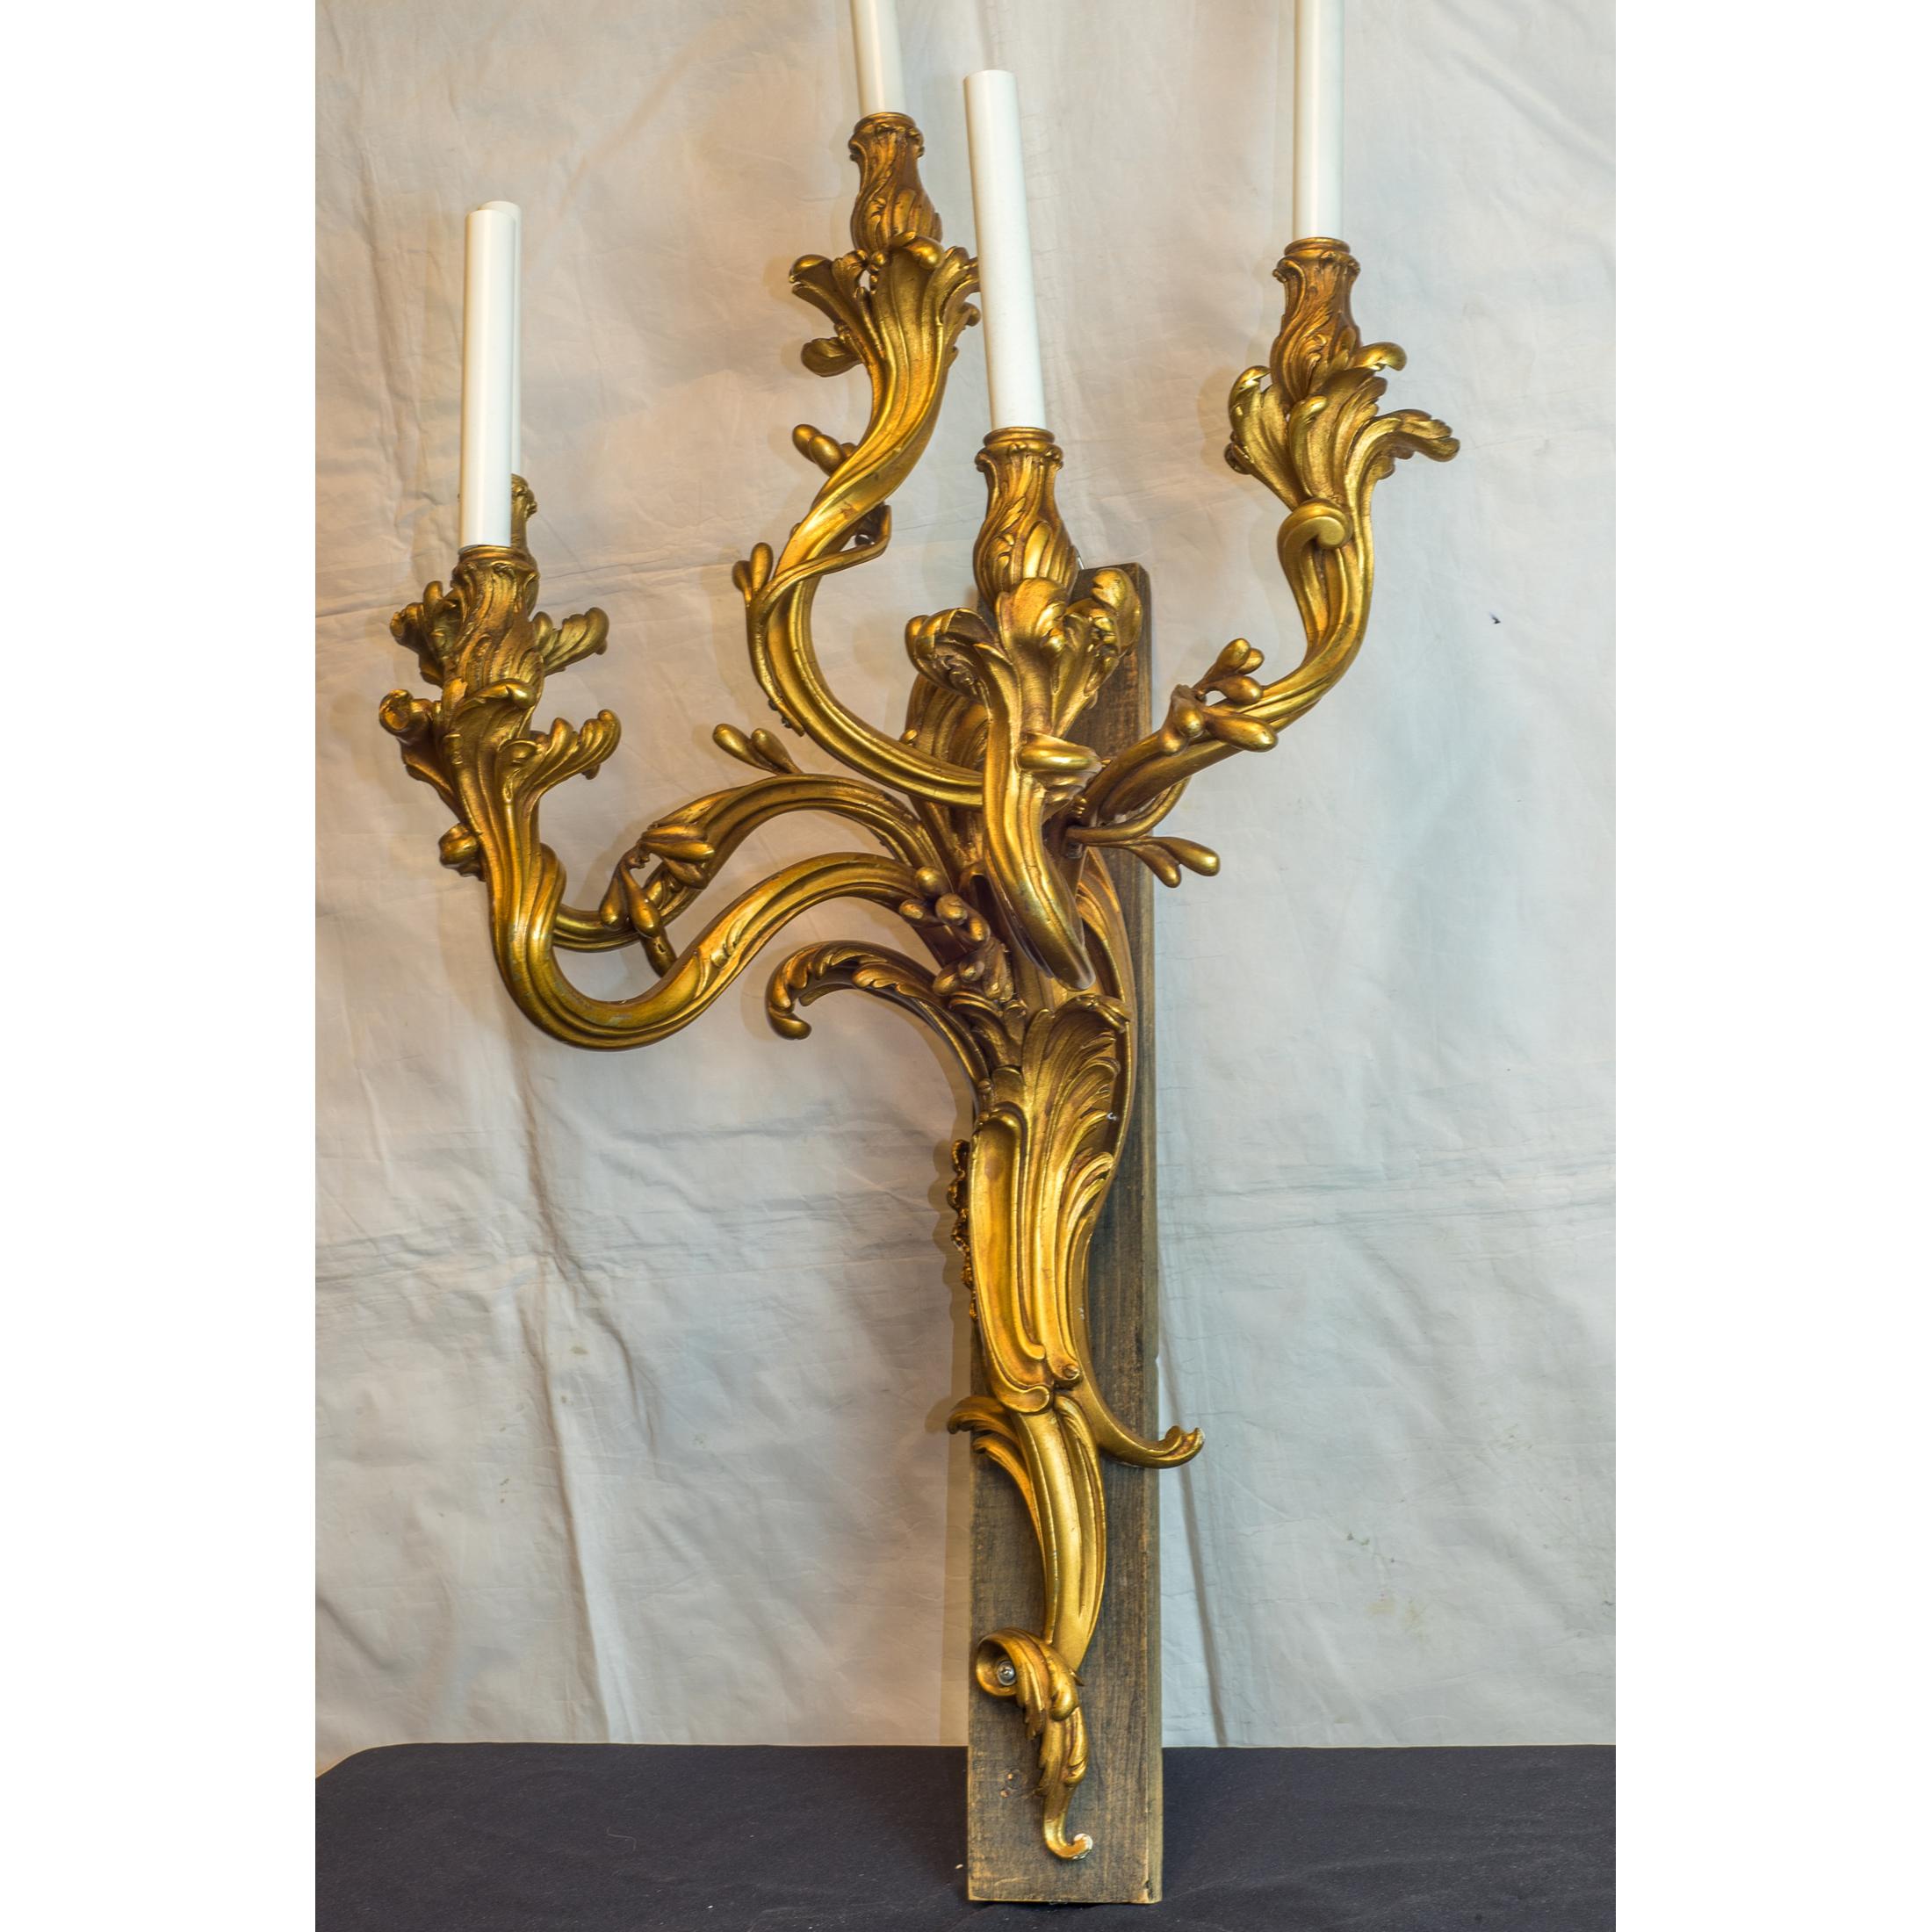 A large pair of French Rococo and Louis XV style five-light Ormolu sconces

Maker: Attrib. François Linke (1855-1946)
Origin: French
Date: 19th century
Dimension: 38 x 20 3/4 x 13 3/4 inches.